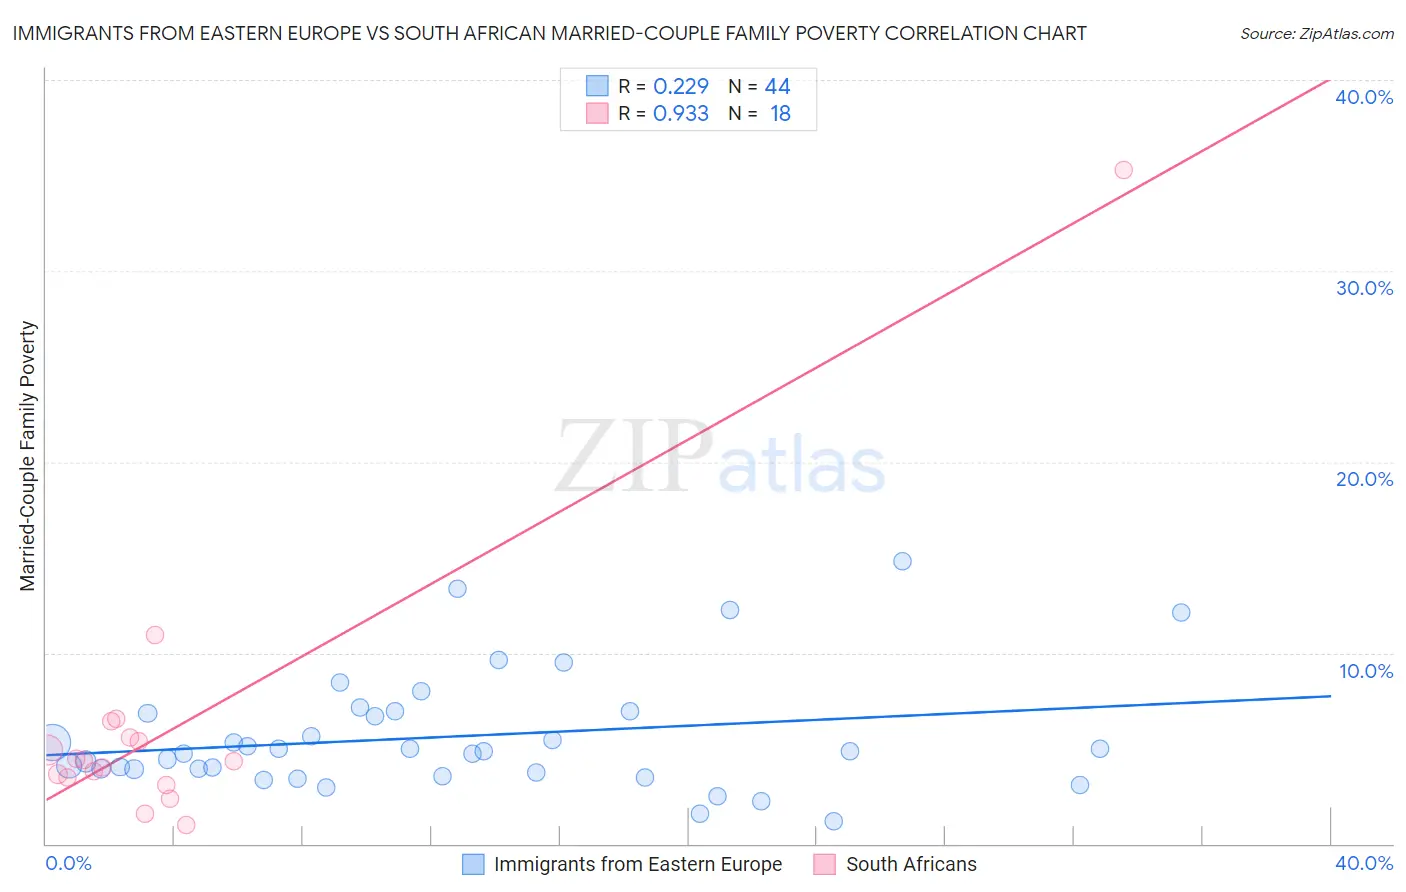 Immigrants from Eastern Europe vs South African Married-Couple Family Poverty